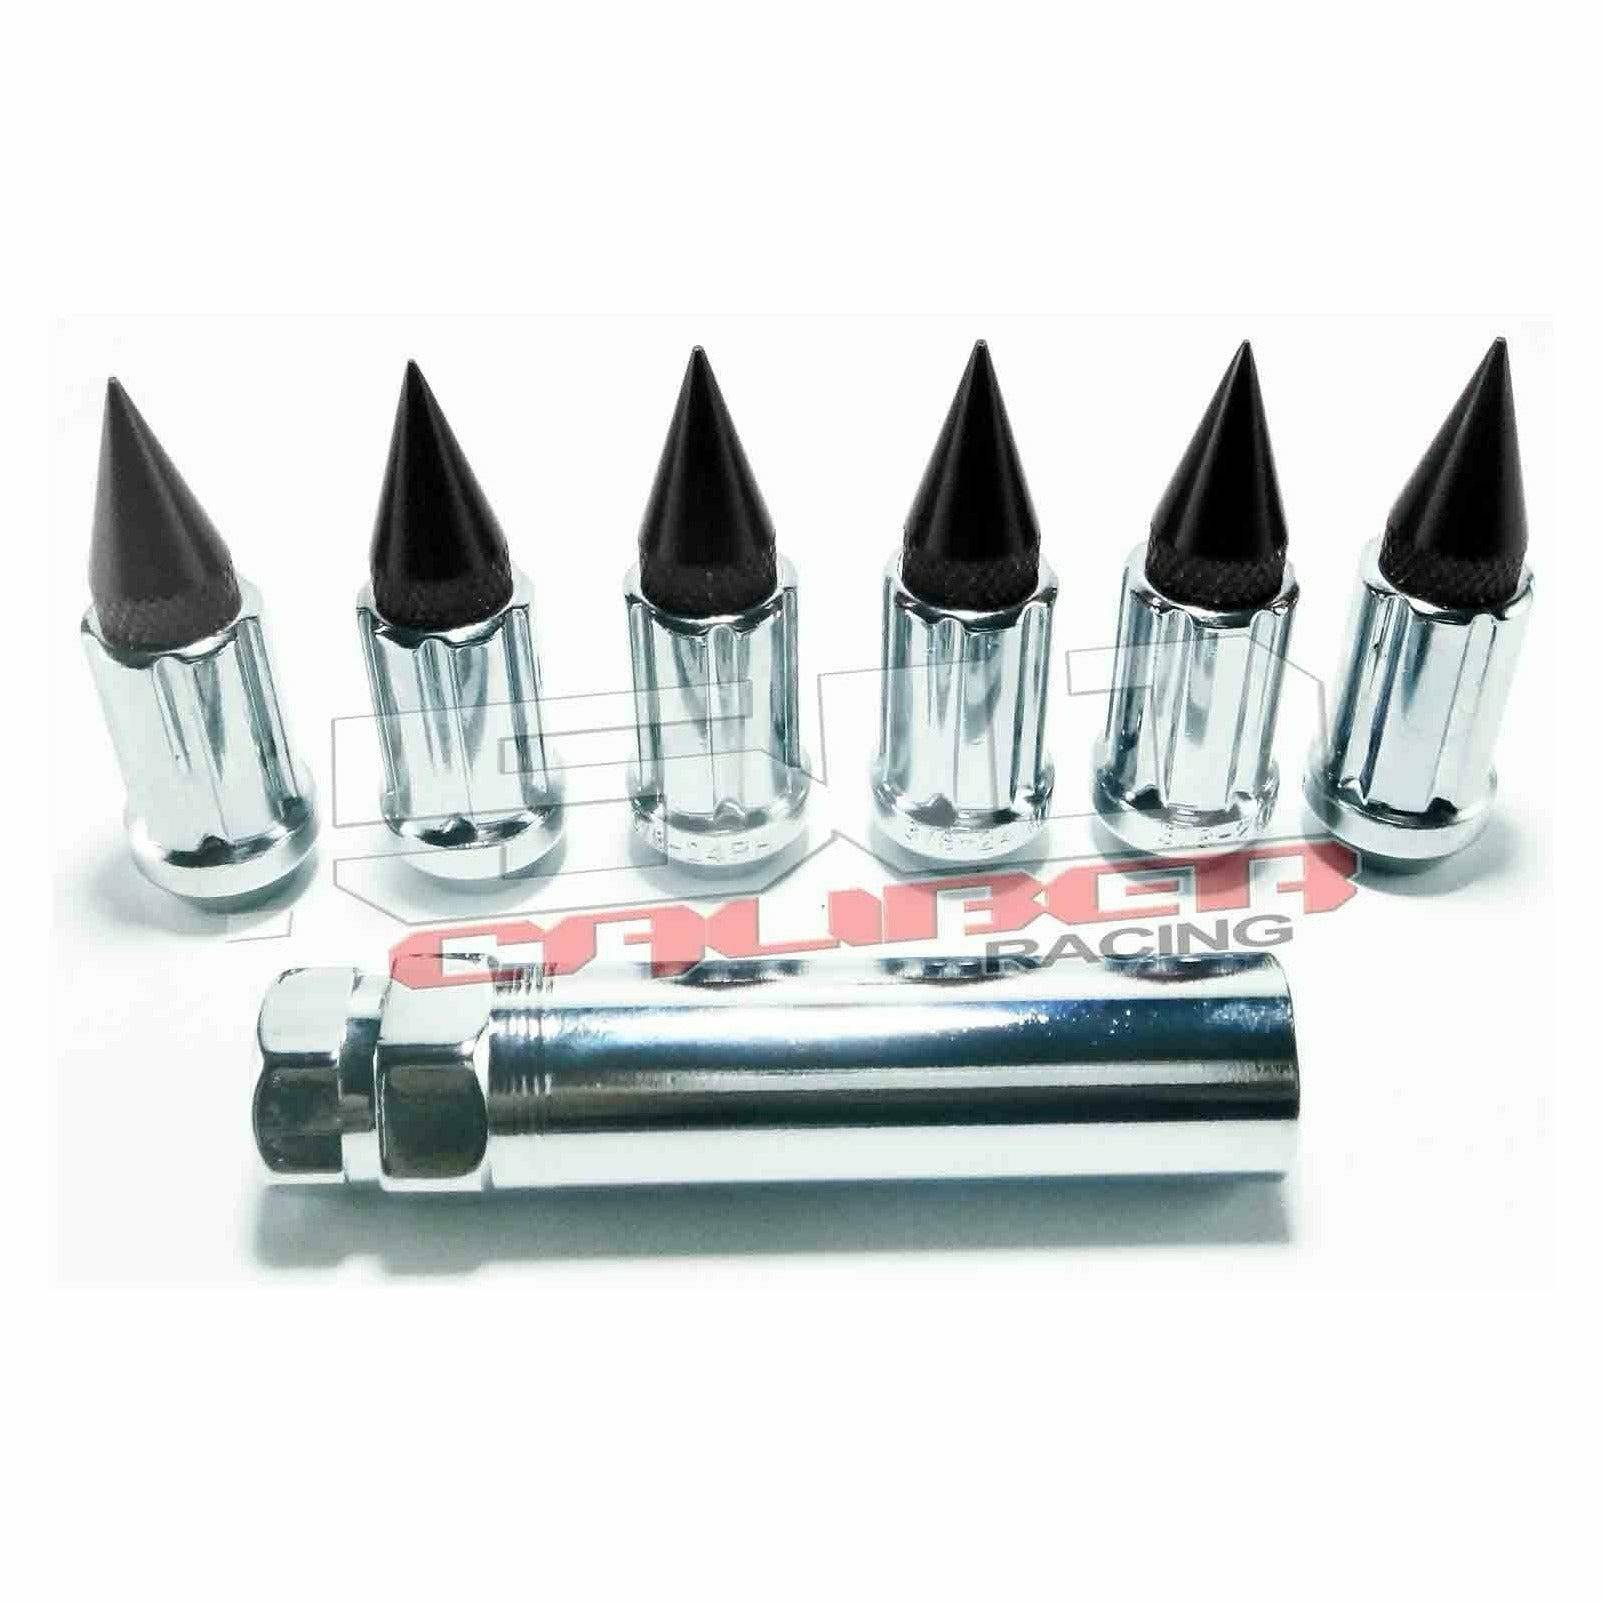 12 x 1.25 mm Spiked Lug Nuts (16 Pack)